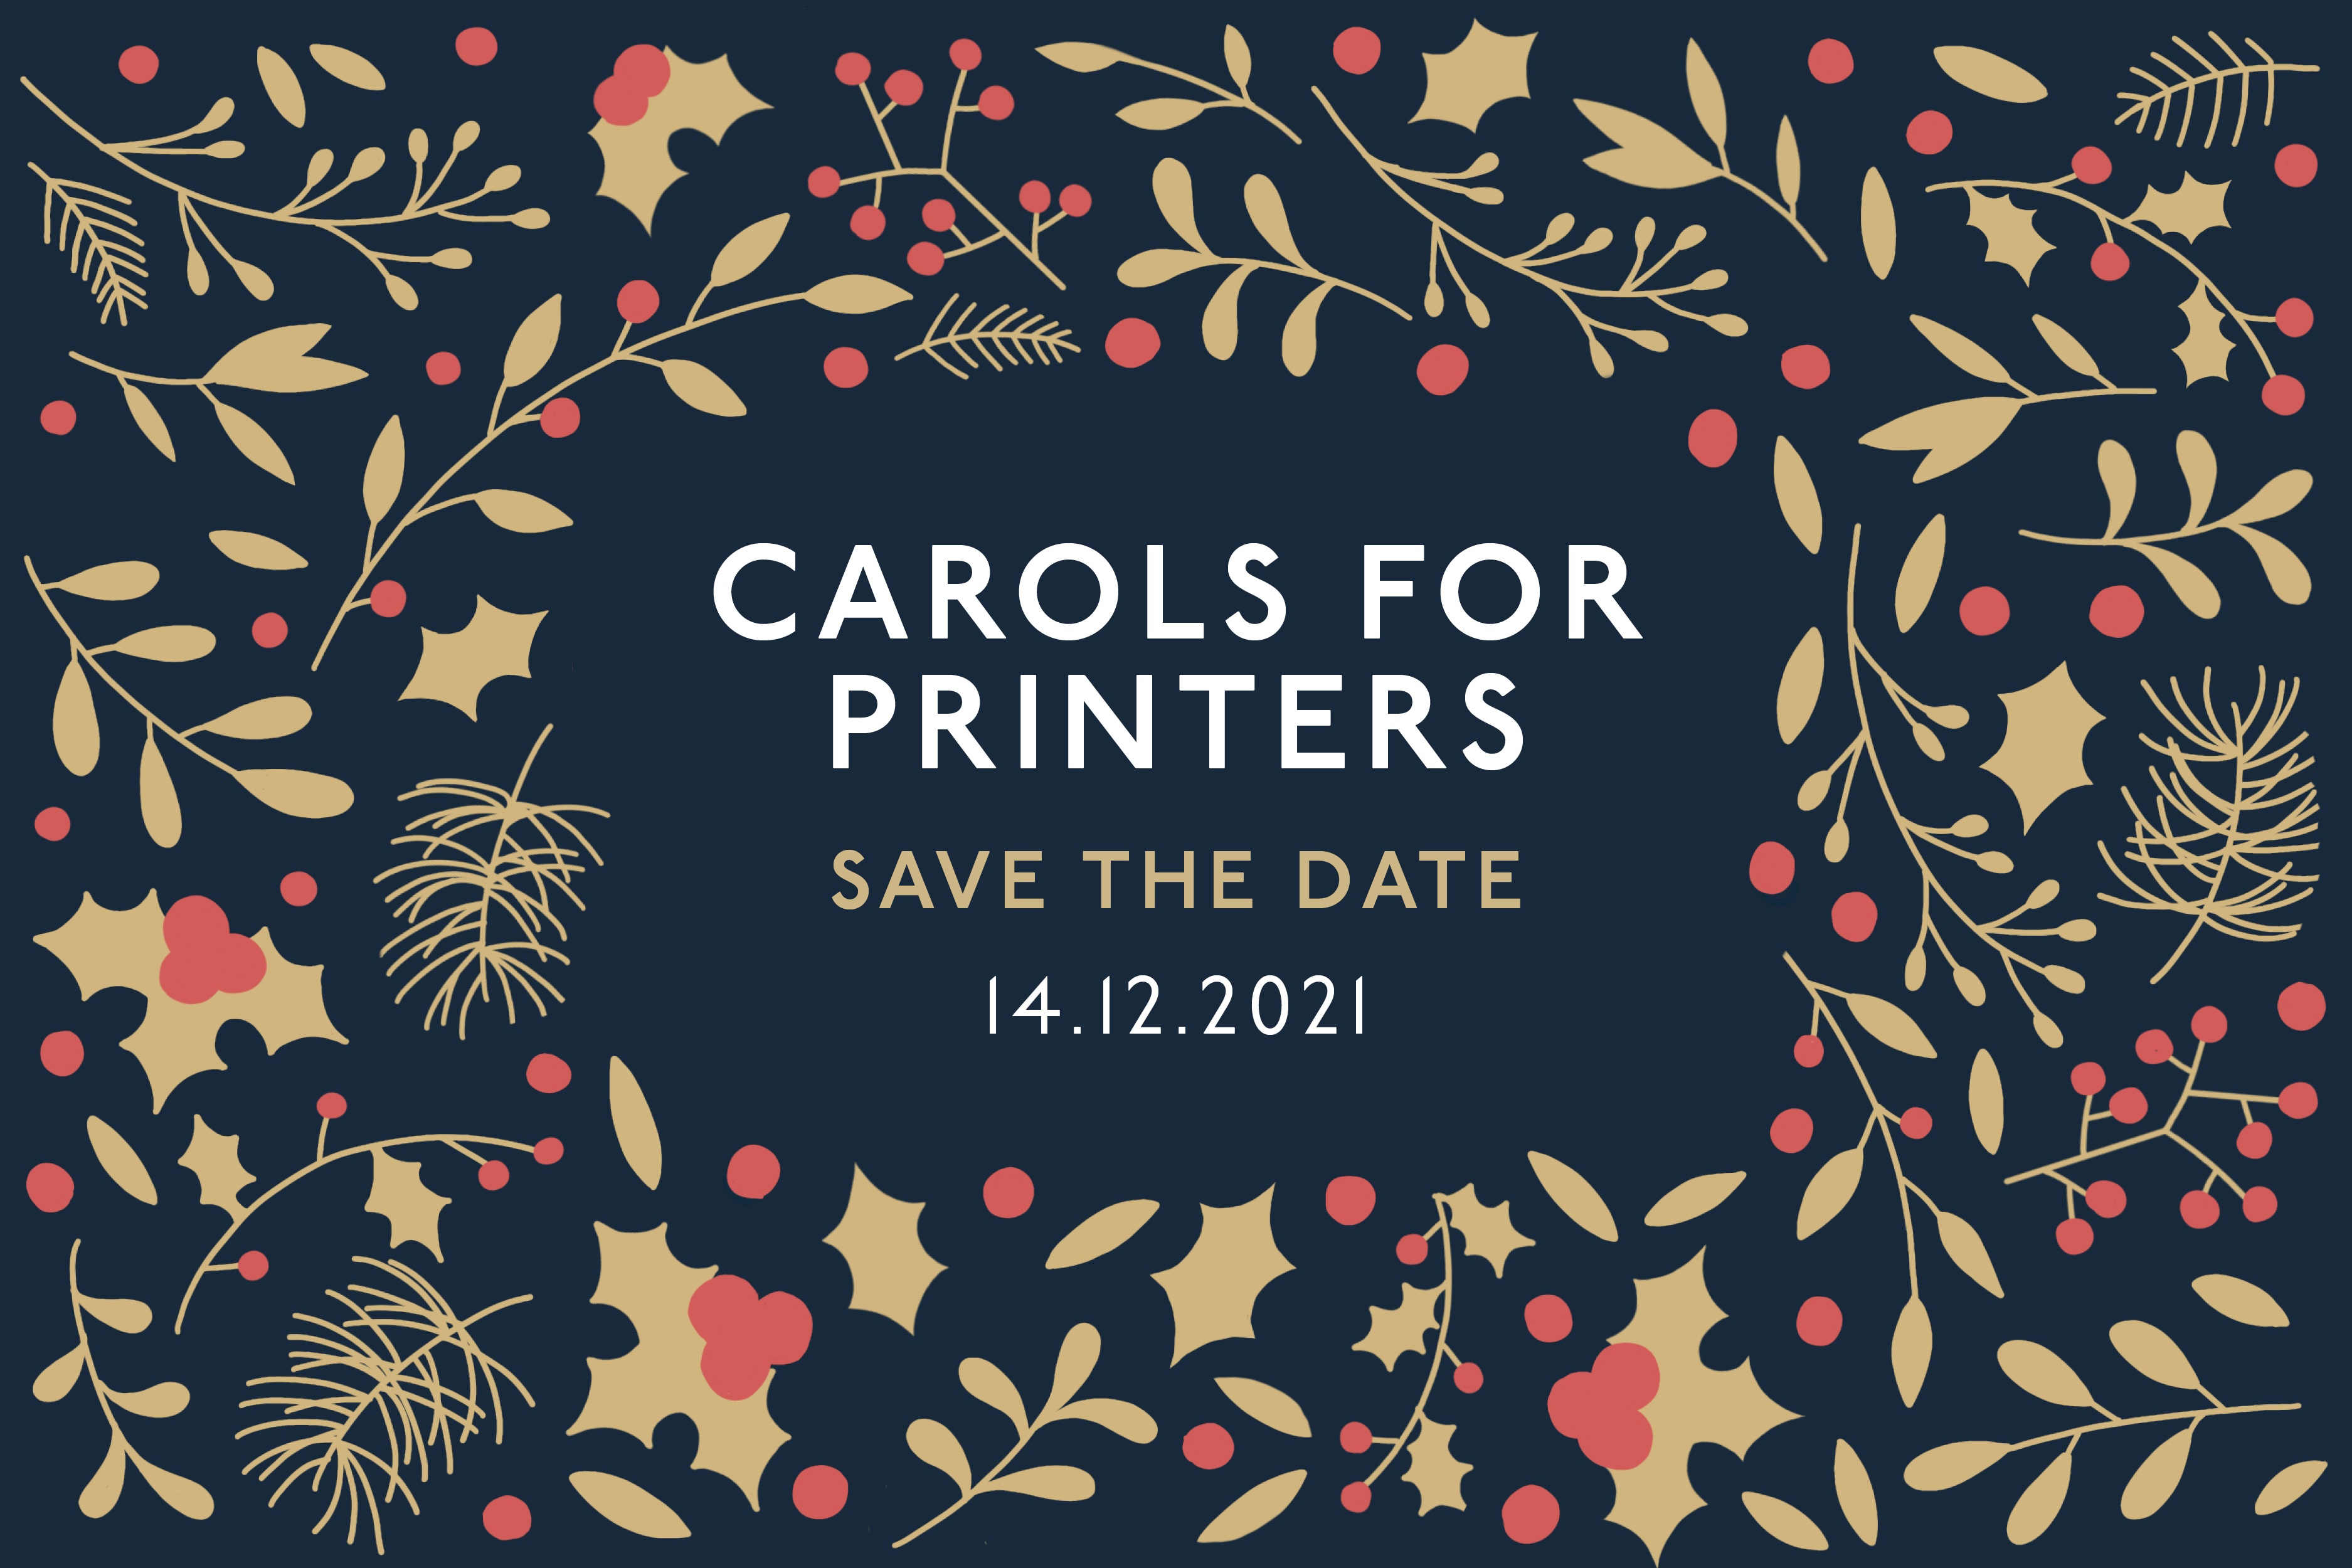 Carols for Printers is back! 